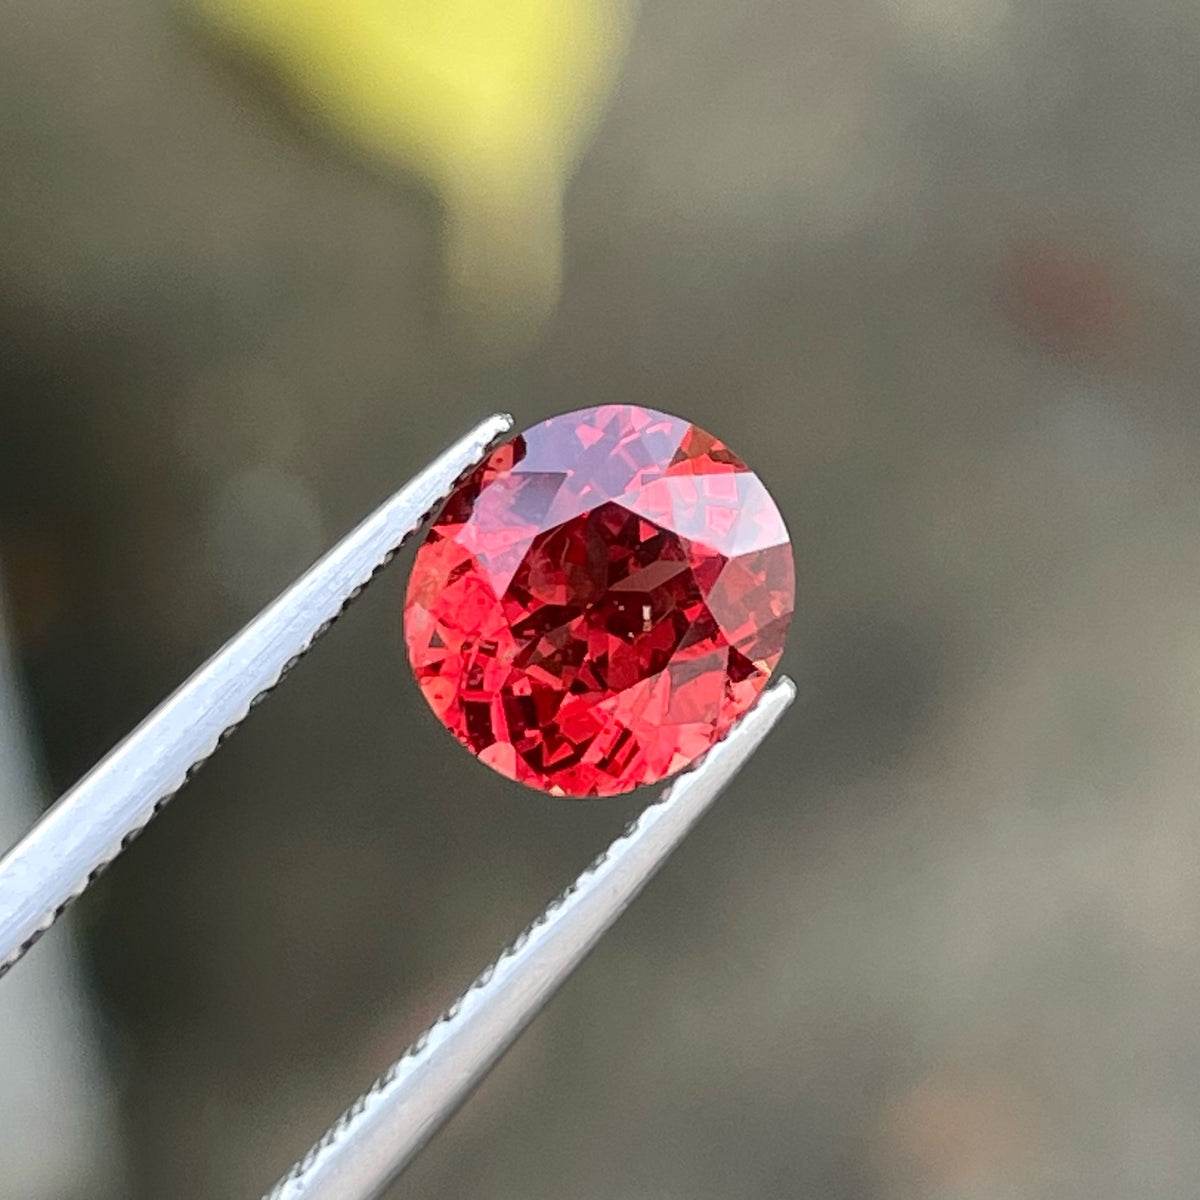 Gorgeous Orange Red Spinel Loose Stone